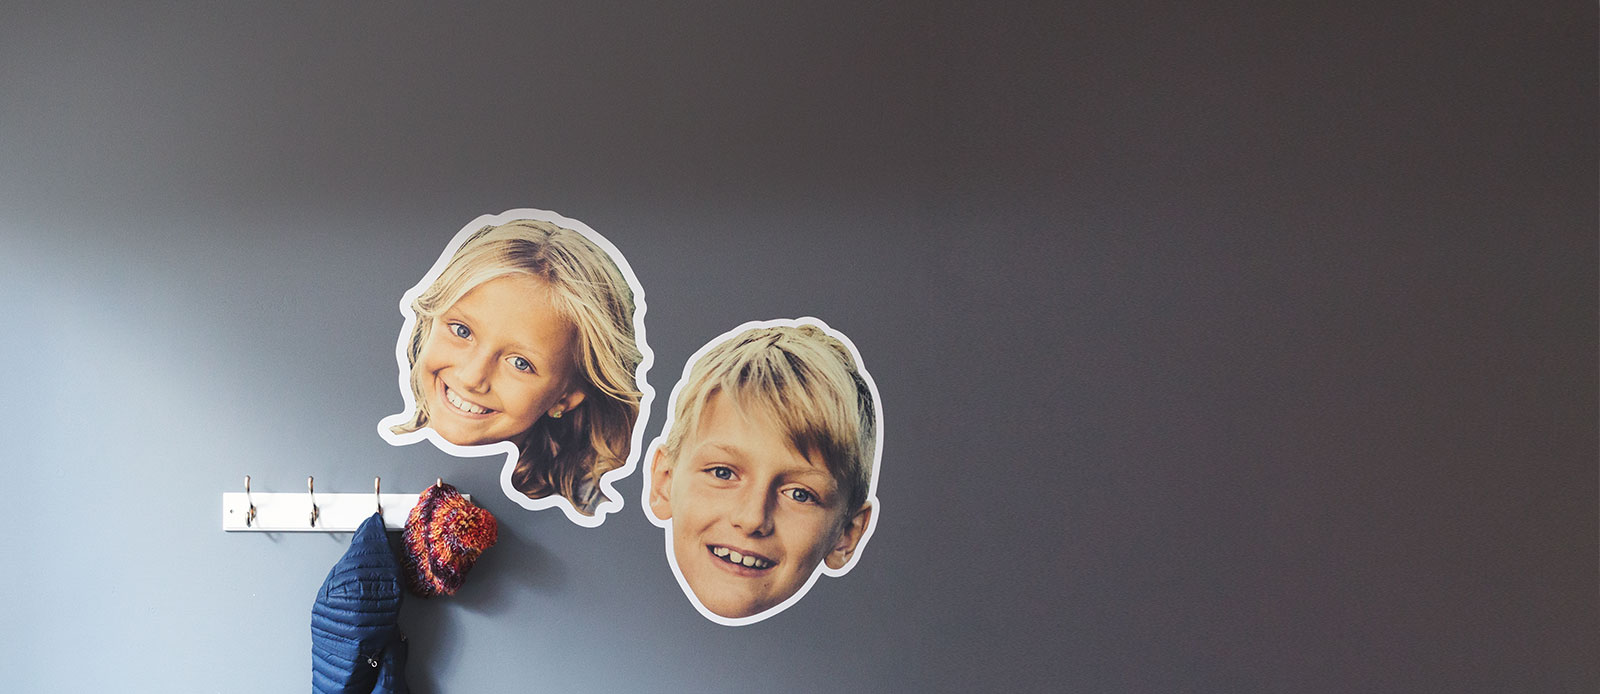 Face wall decals